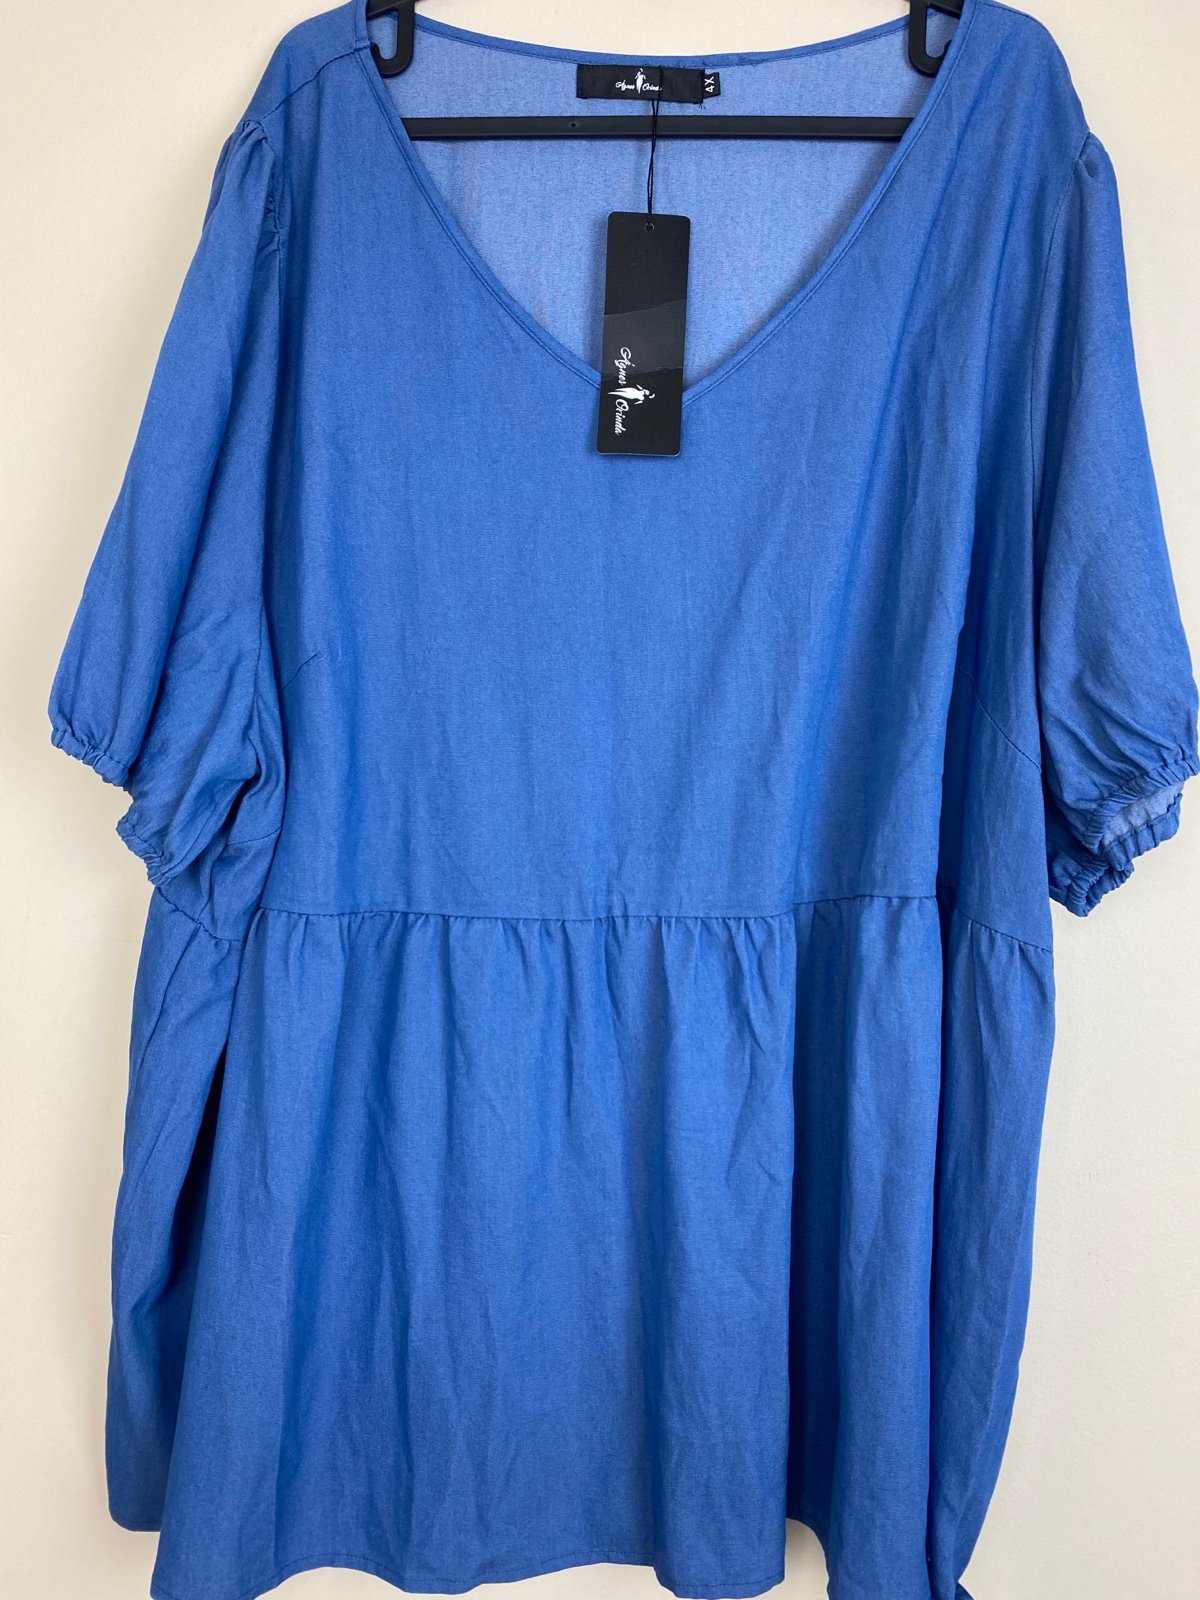 the Lowest price NWT Blue Denim Style Short Sleeve Blou